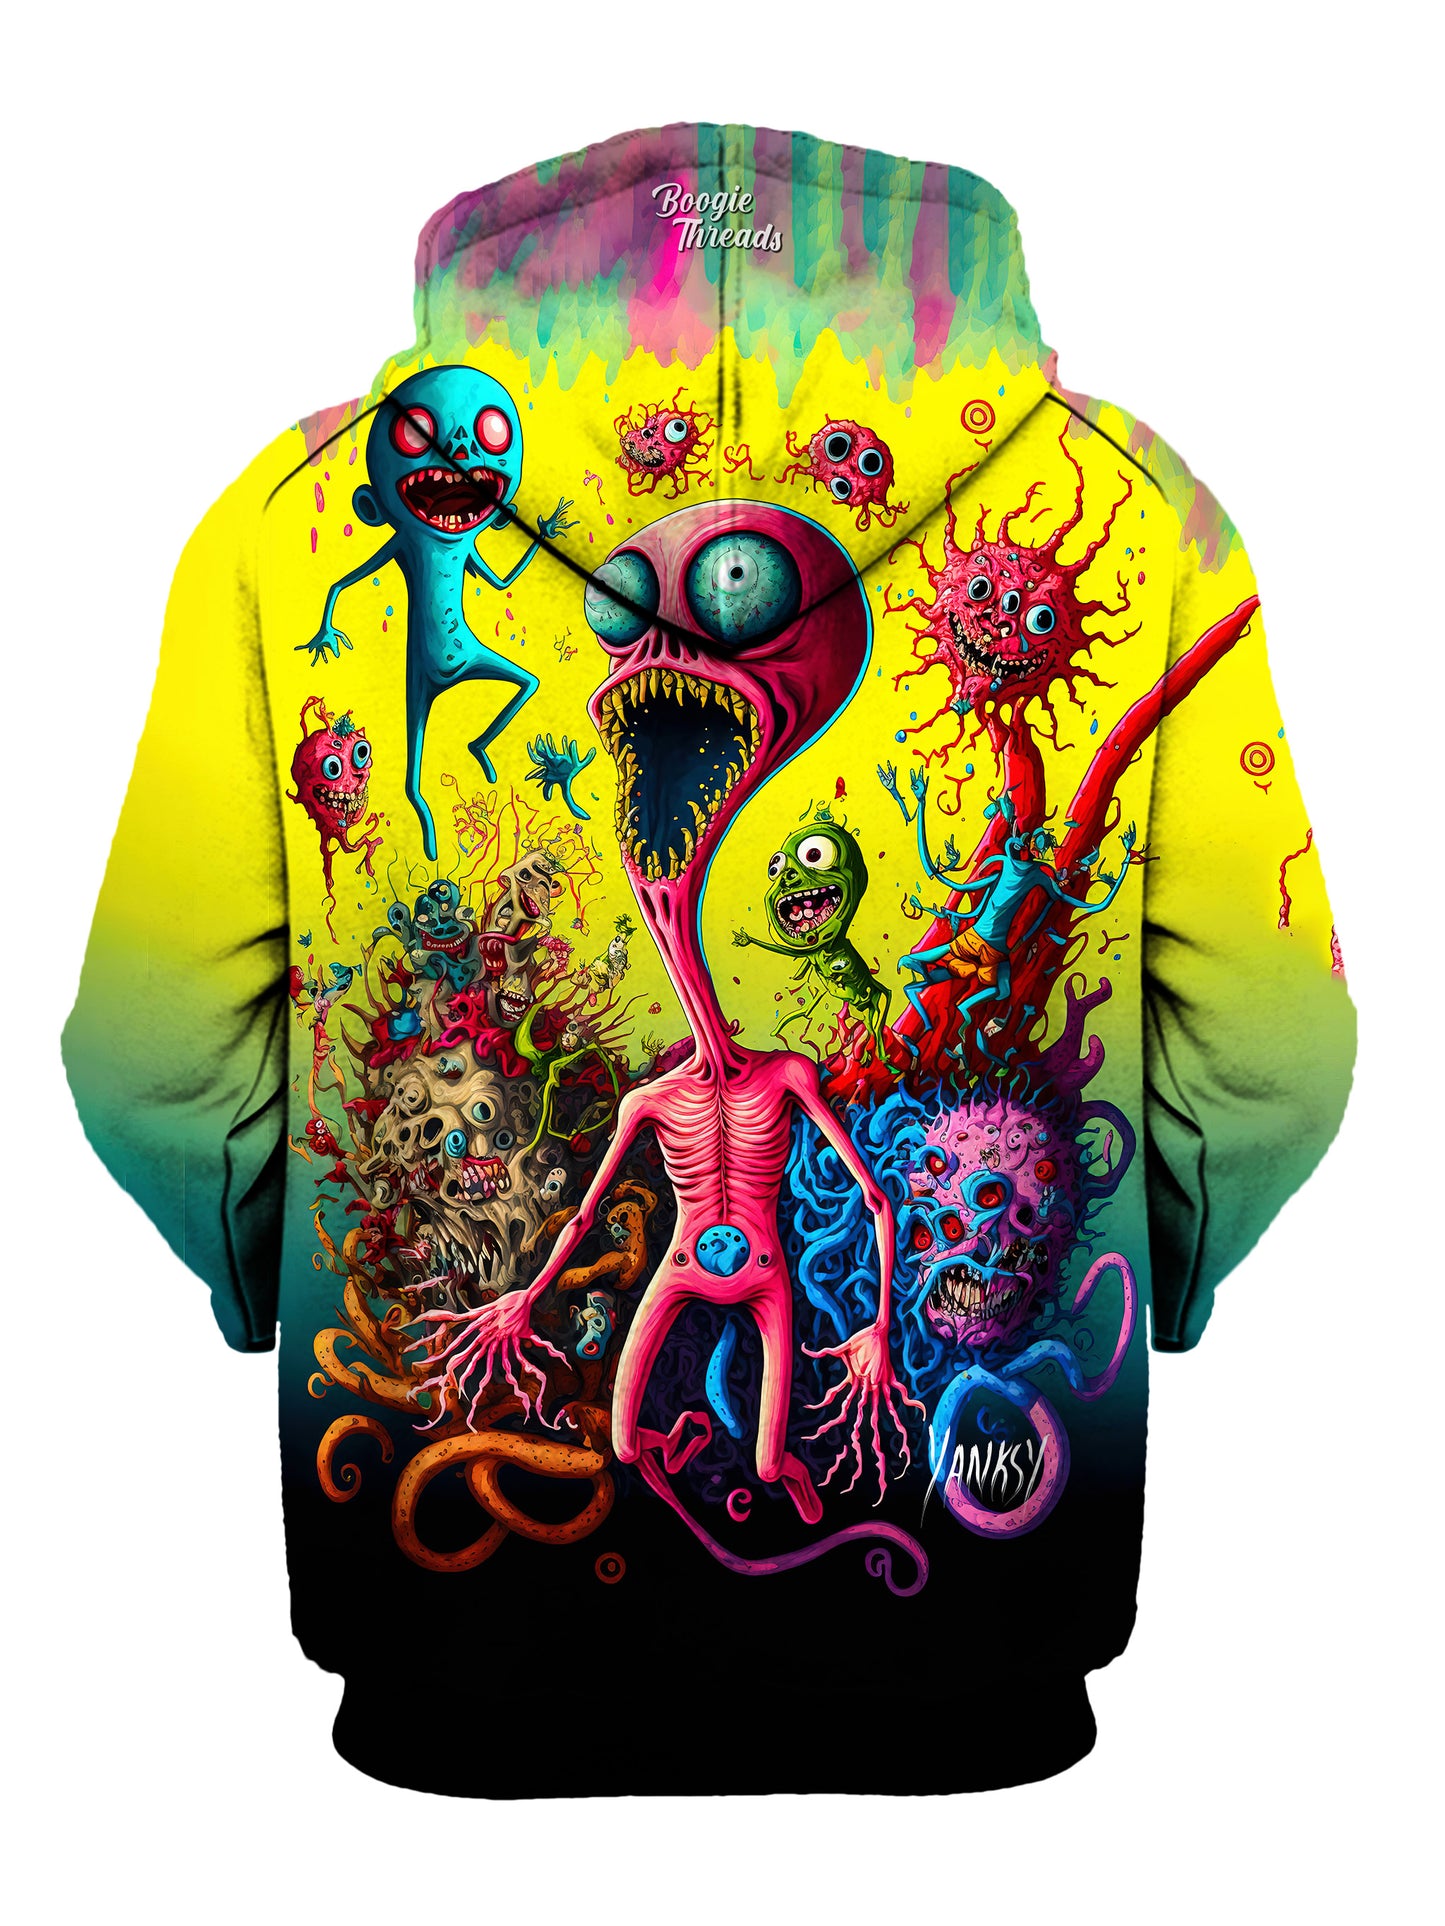 Colorful and trippy hoodie perfect for expressing your unique style